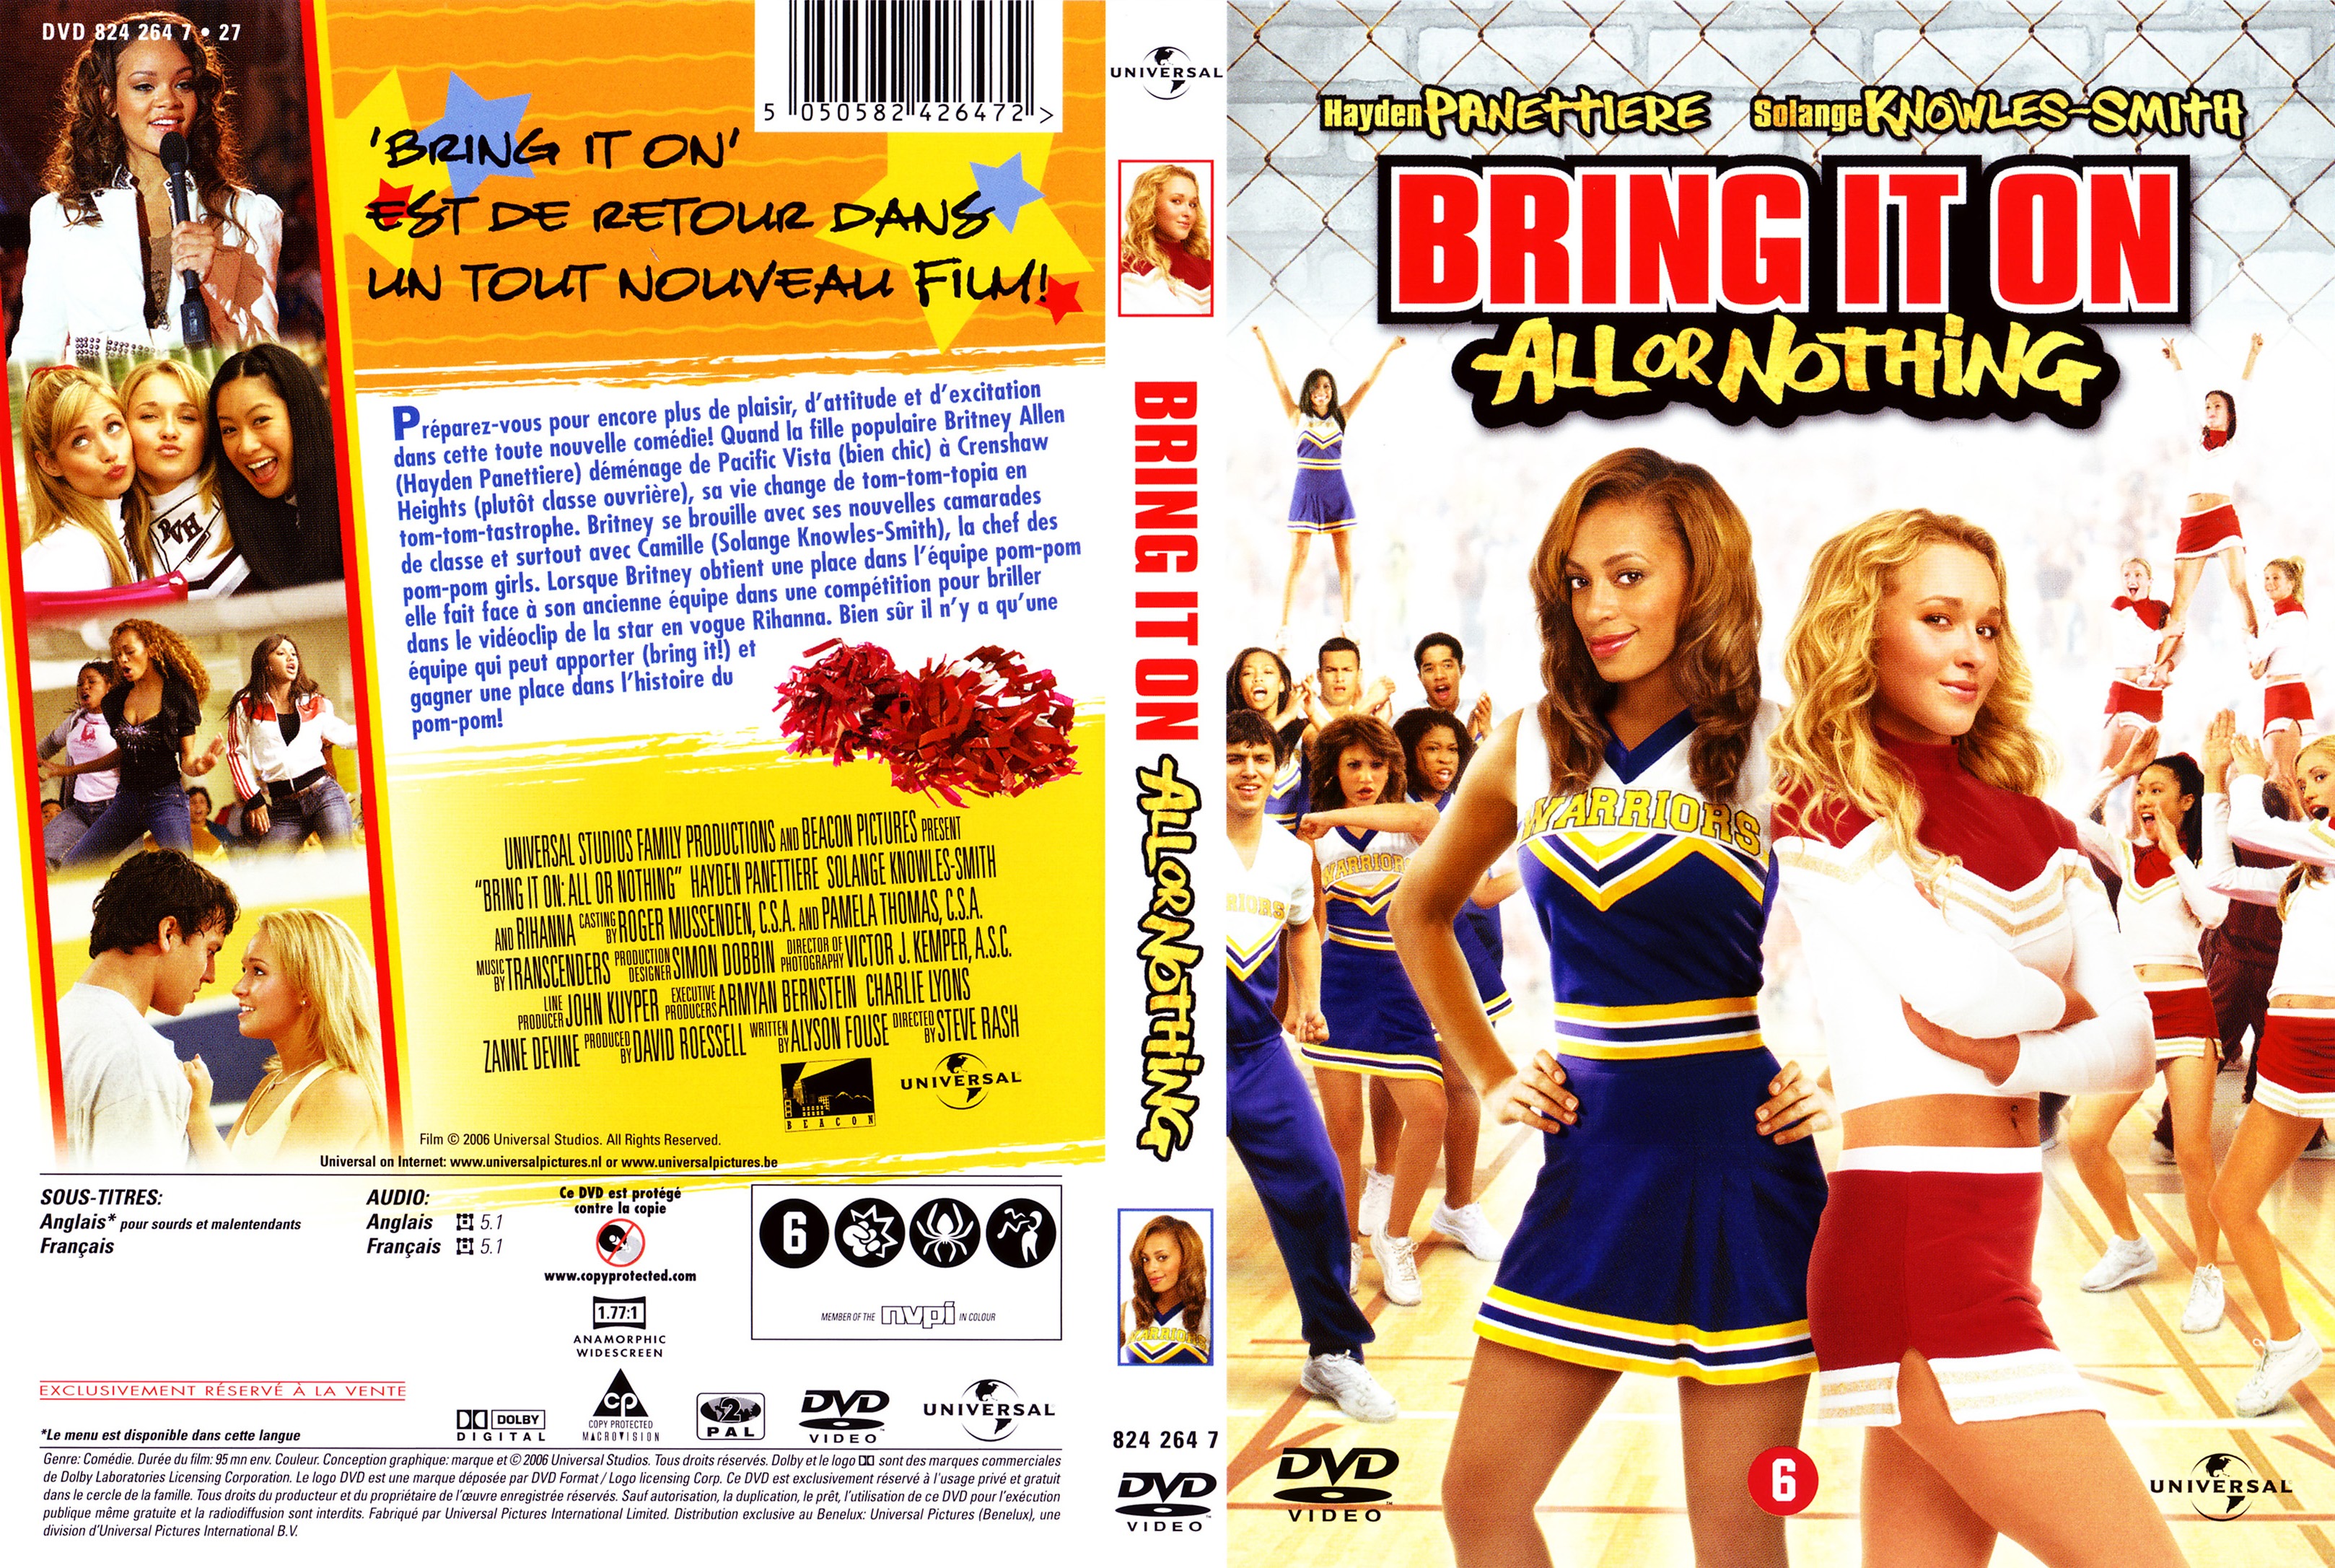 Jaquette DVD American girls 3 - Bring it on all or nothing